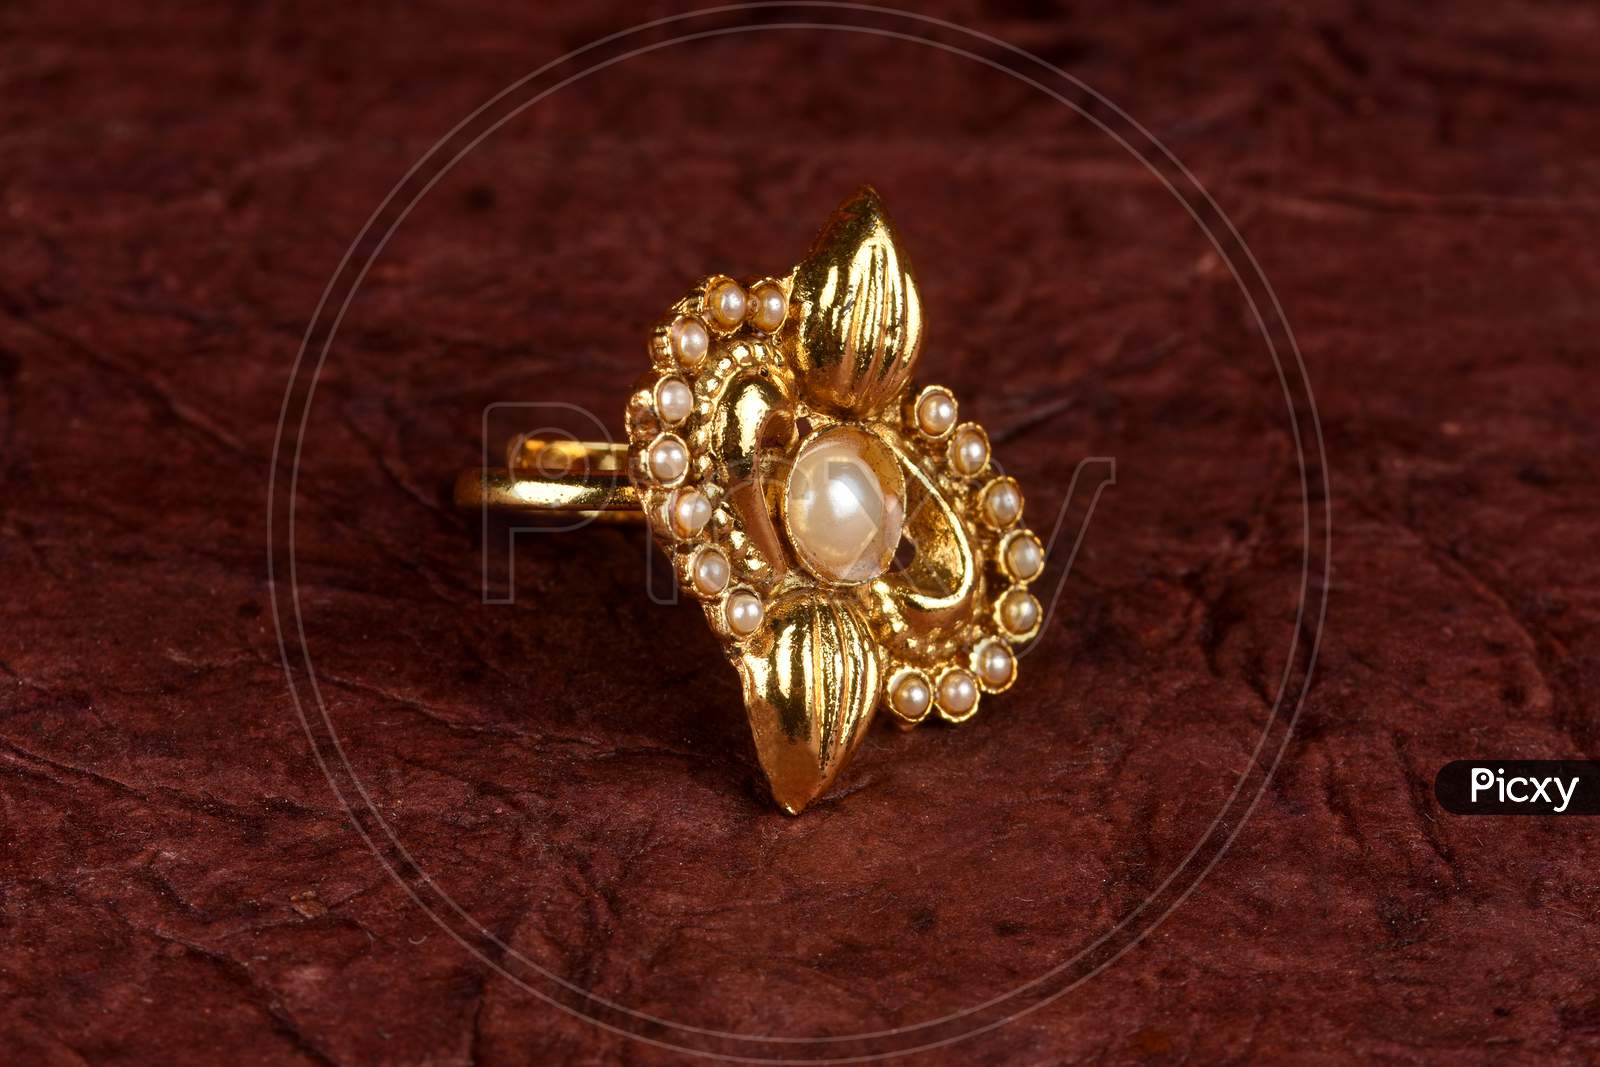 Glamorous Antique Gold Ring On Textured Background. Luxury Female Jewelry, Indian Traditional Jewellery,Bridal Gold Ring Wedding Jewellery,Vintage Ring